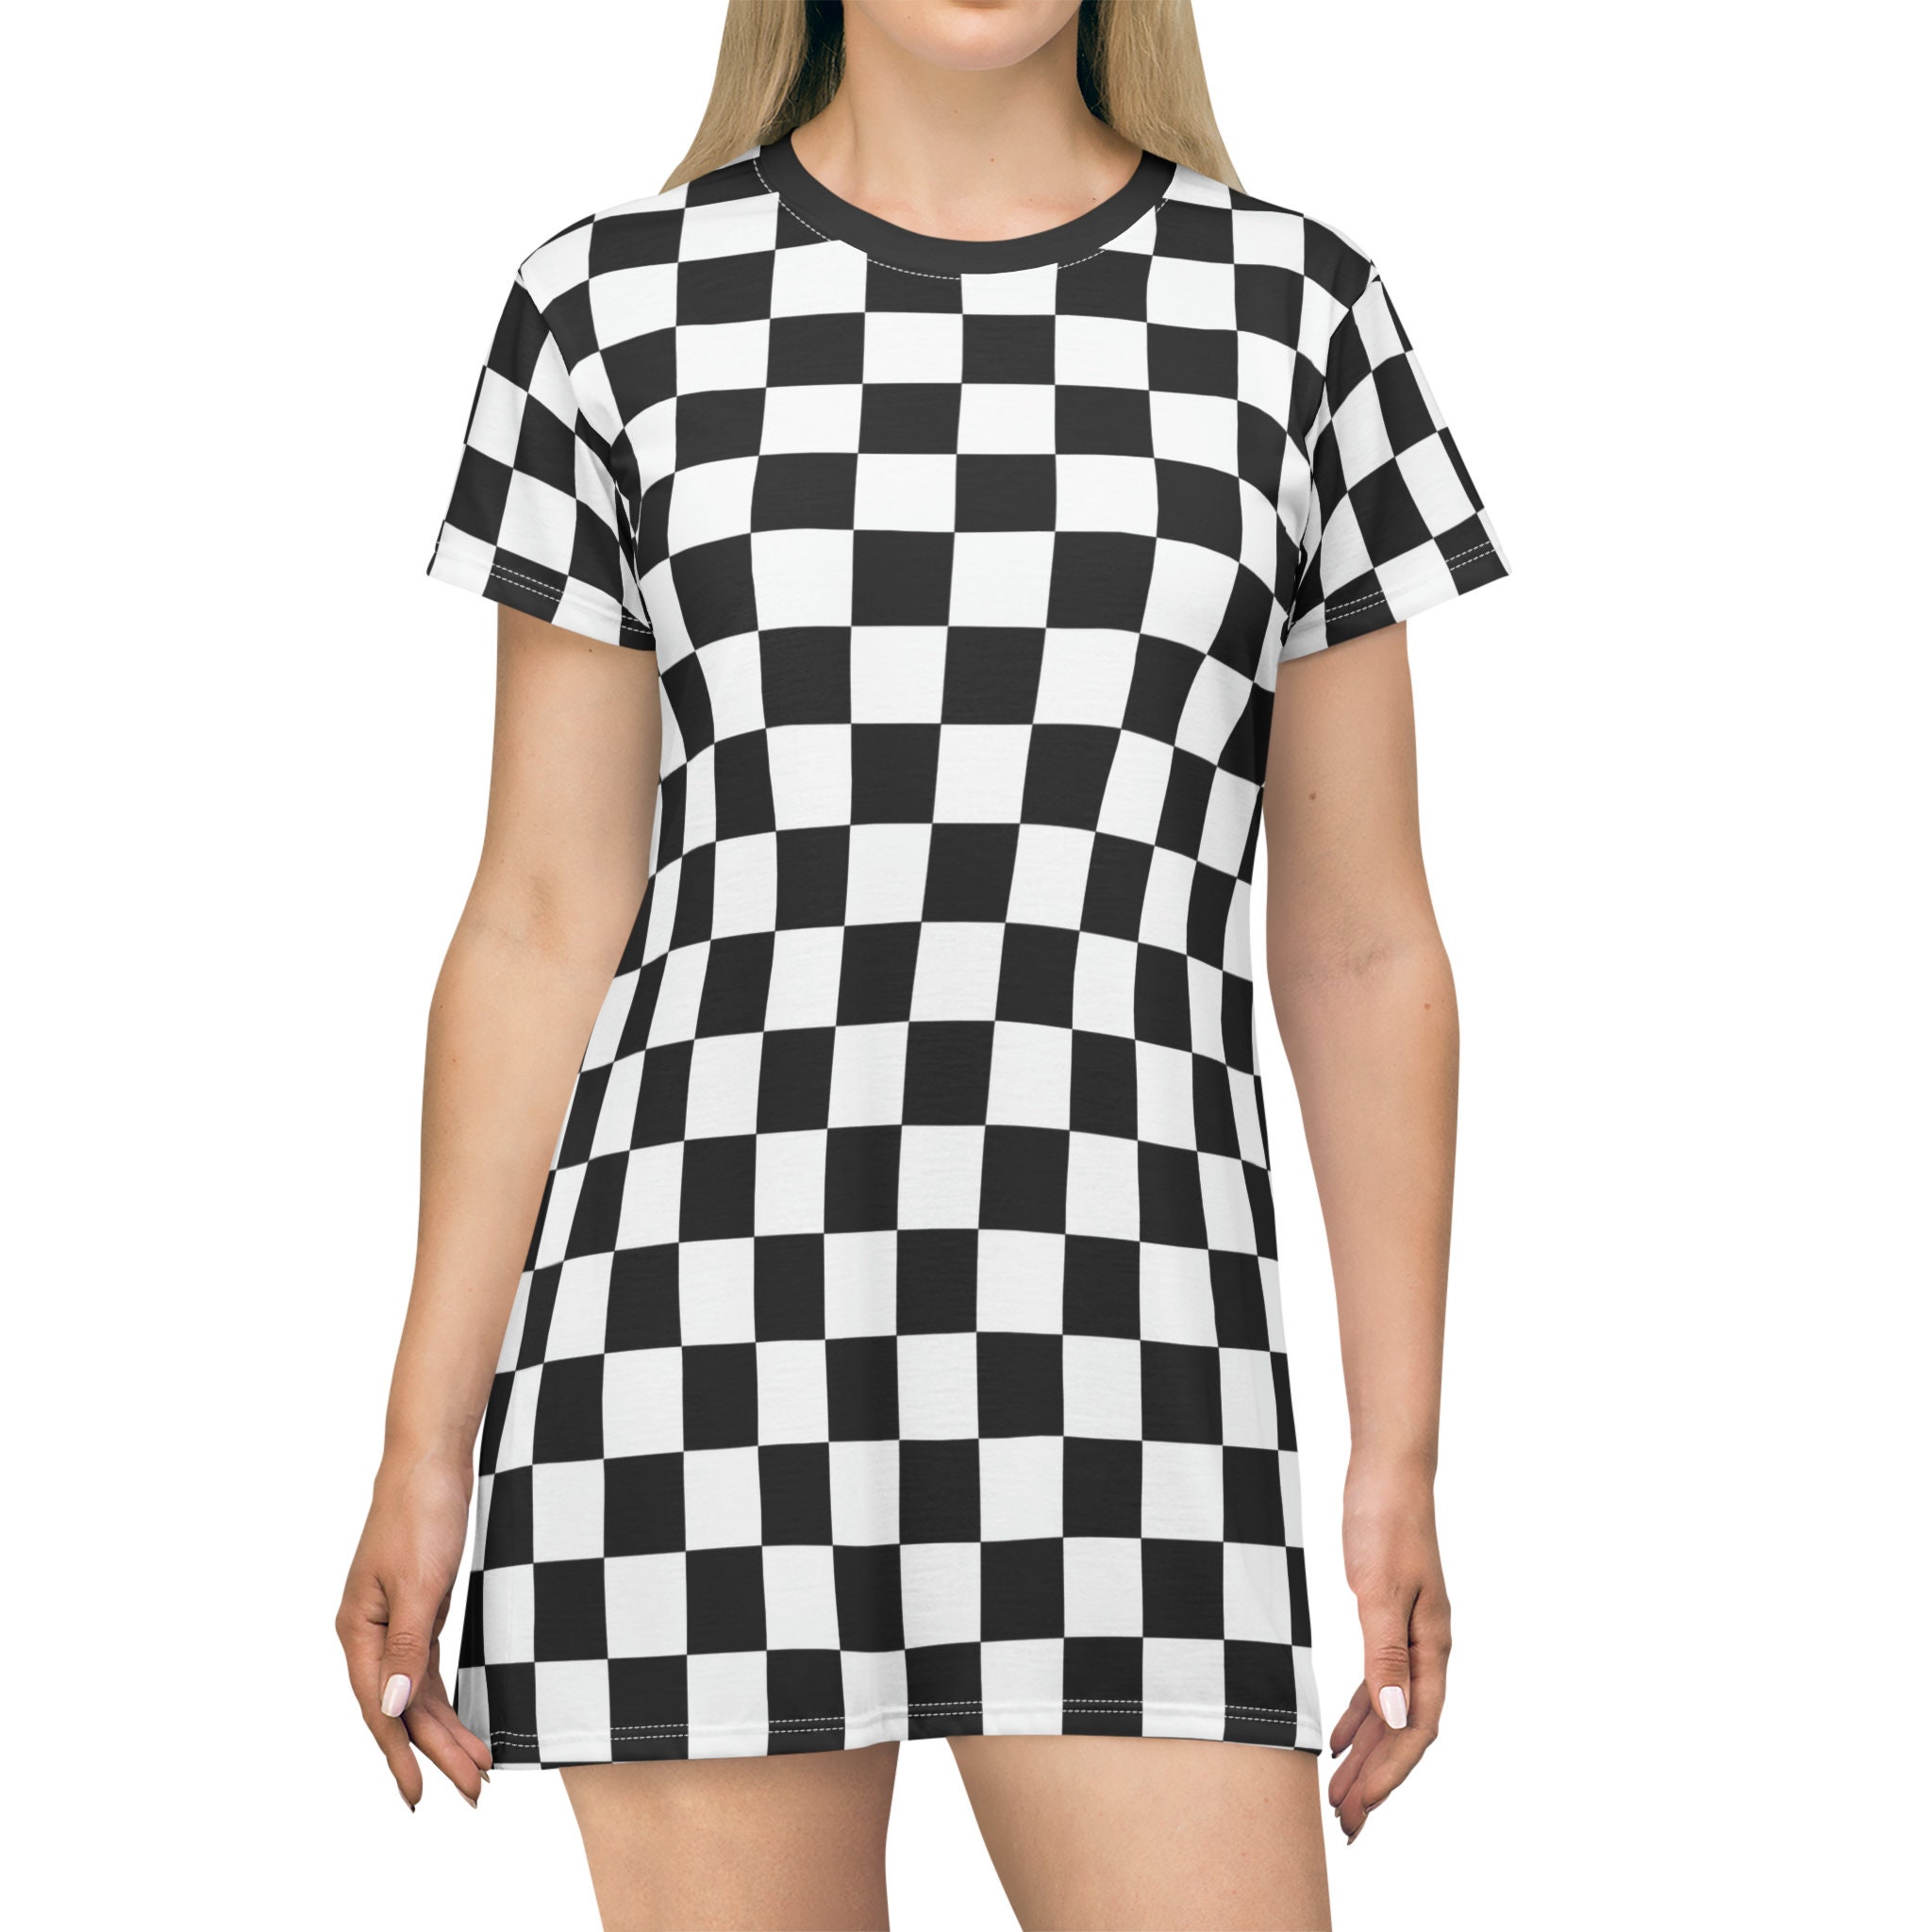 Louis Vuitton vintage short dress with black and white checkerboard pattern  - S - 2020s secondhand Lysis